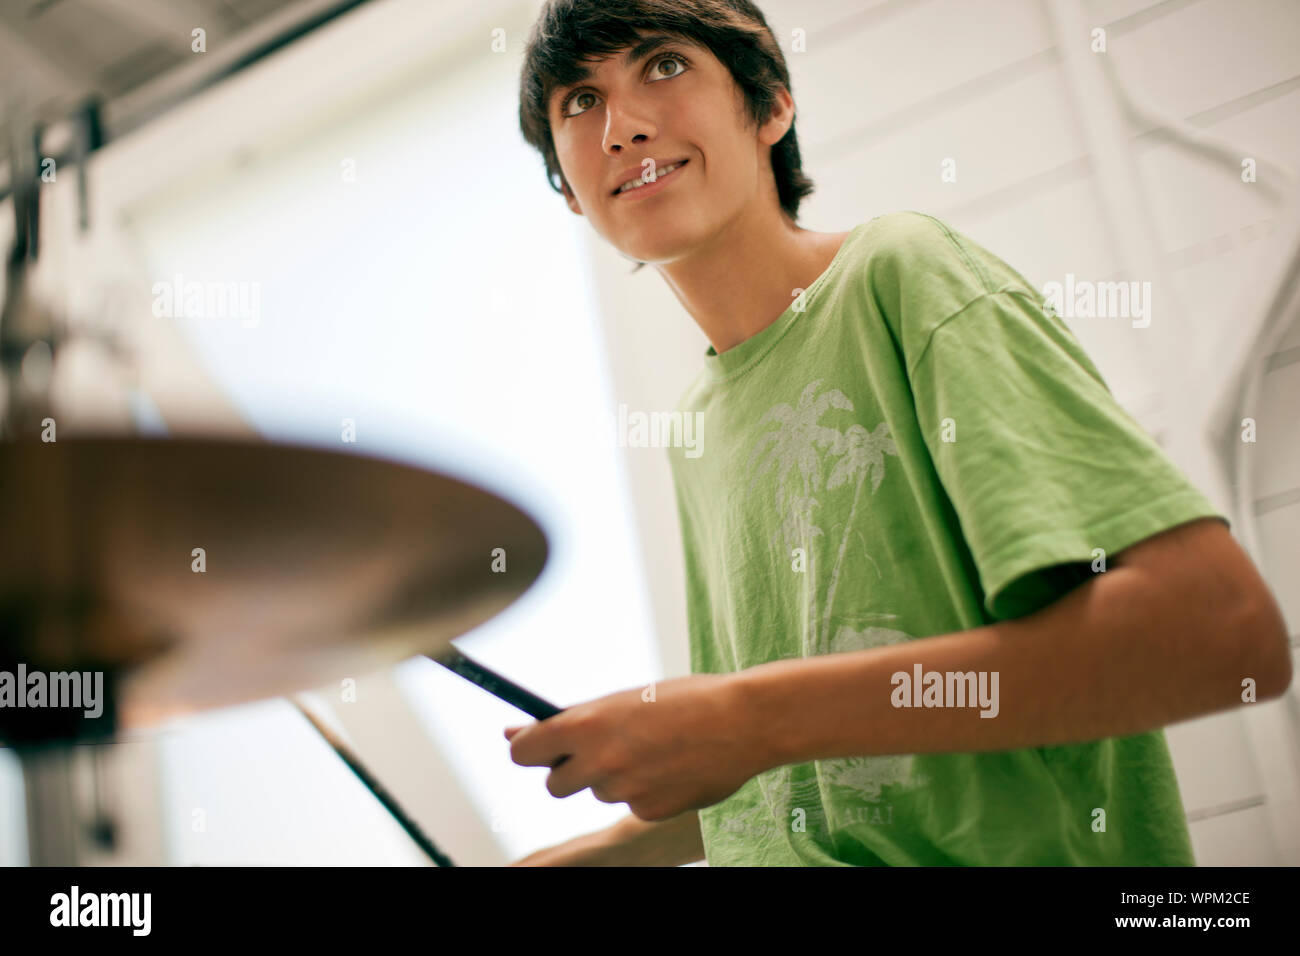 Teenage boy playing the drums. Stock Photo